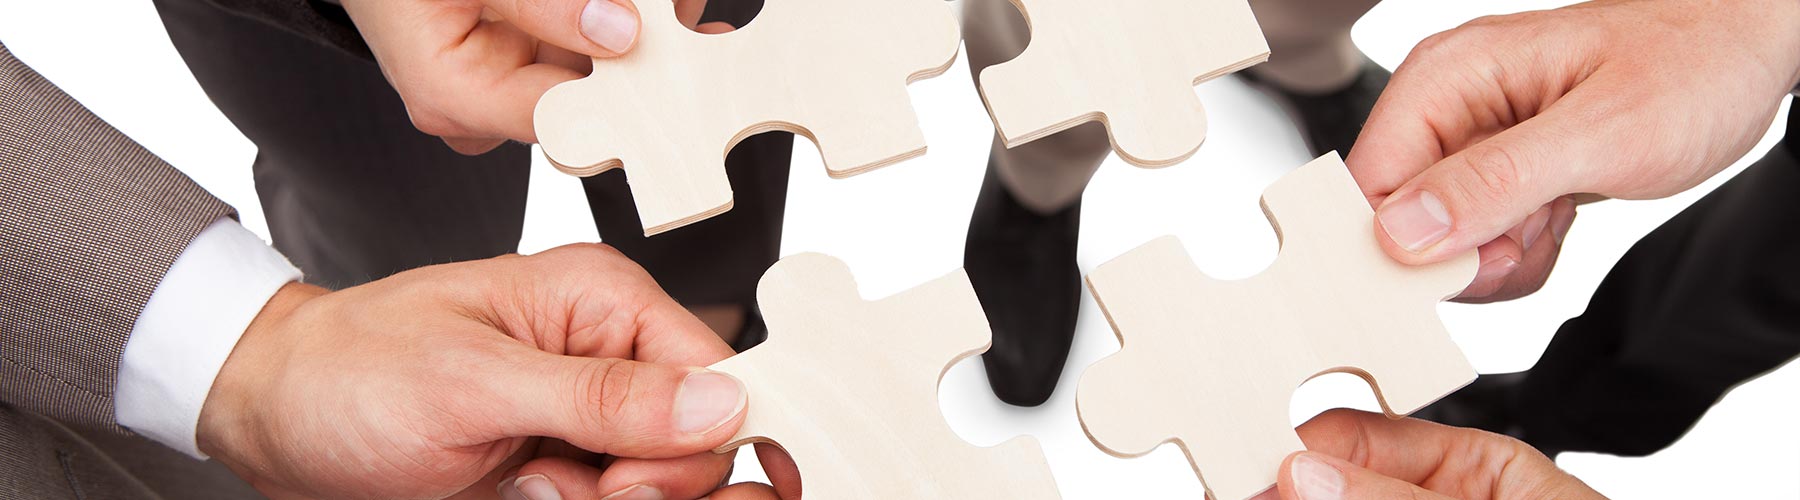 four people each holding a large puzzle piece towards each other